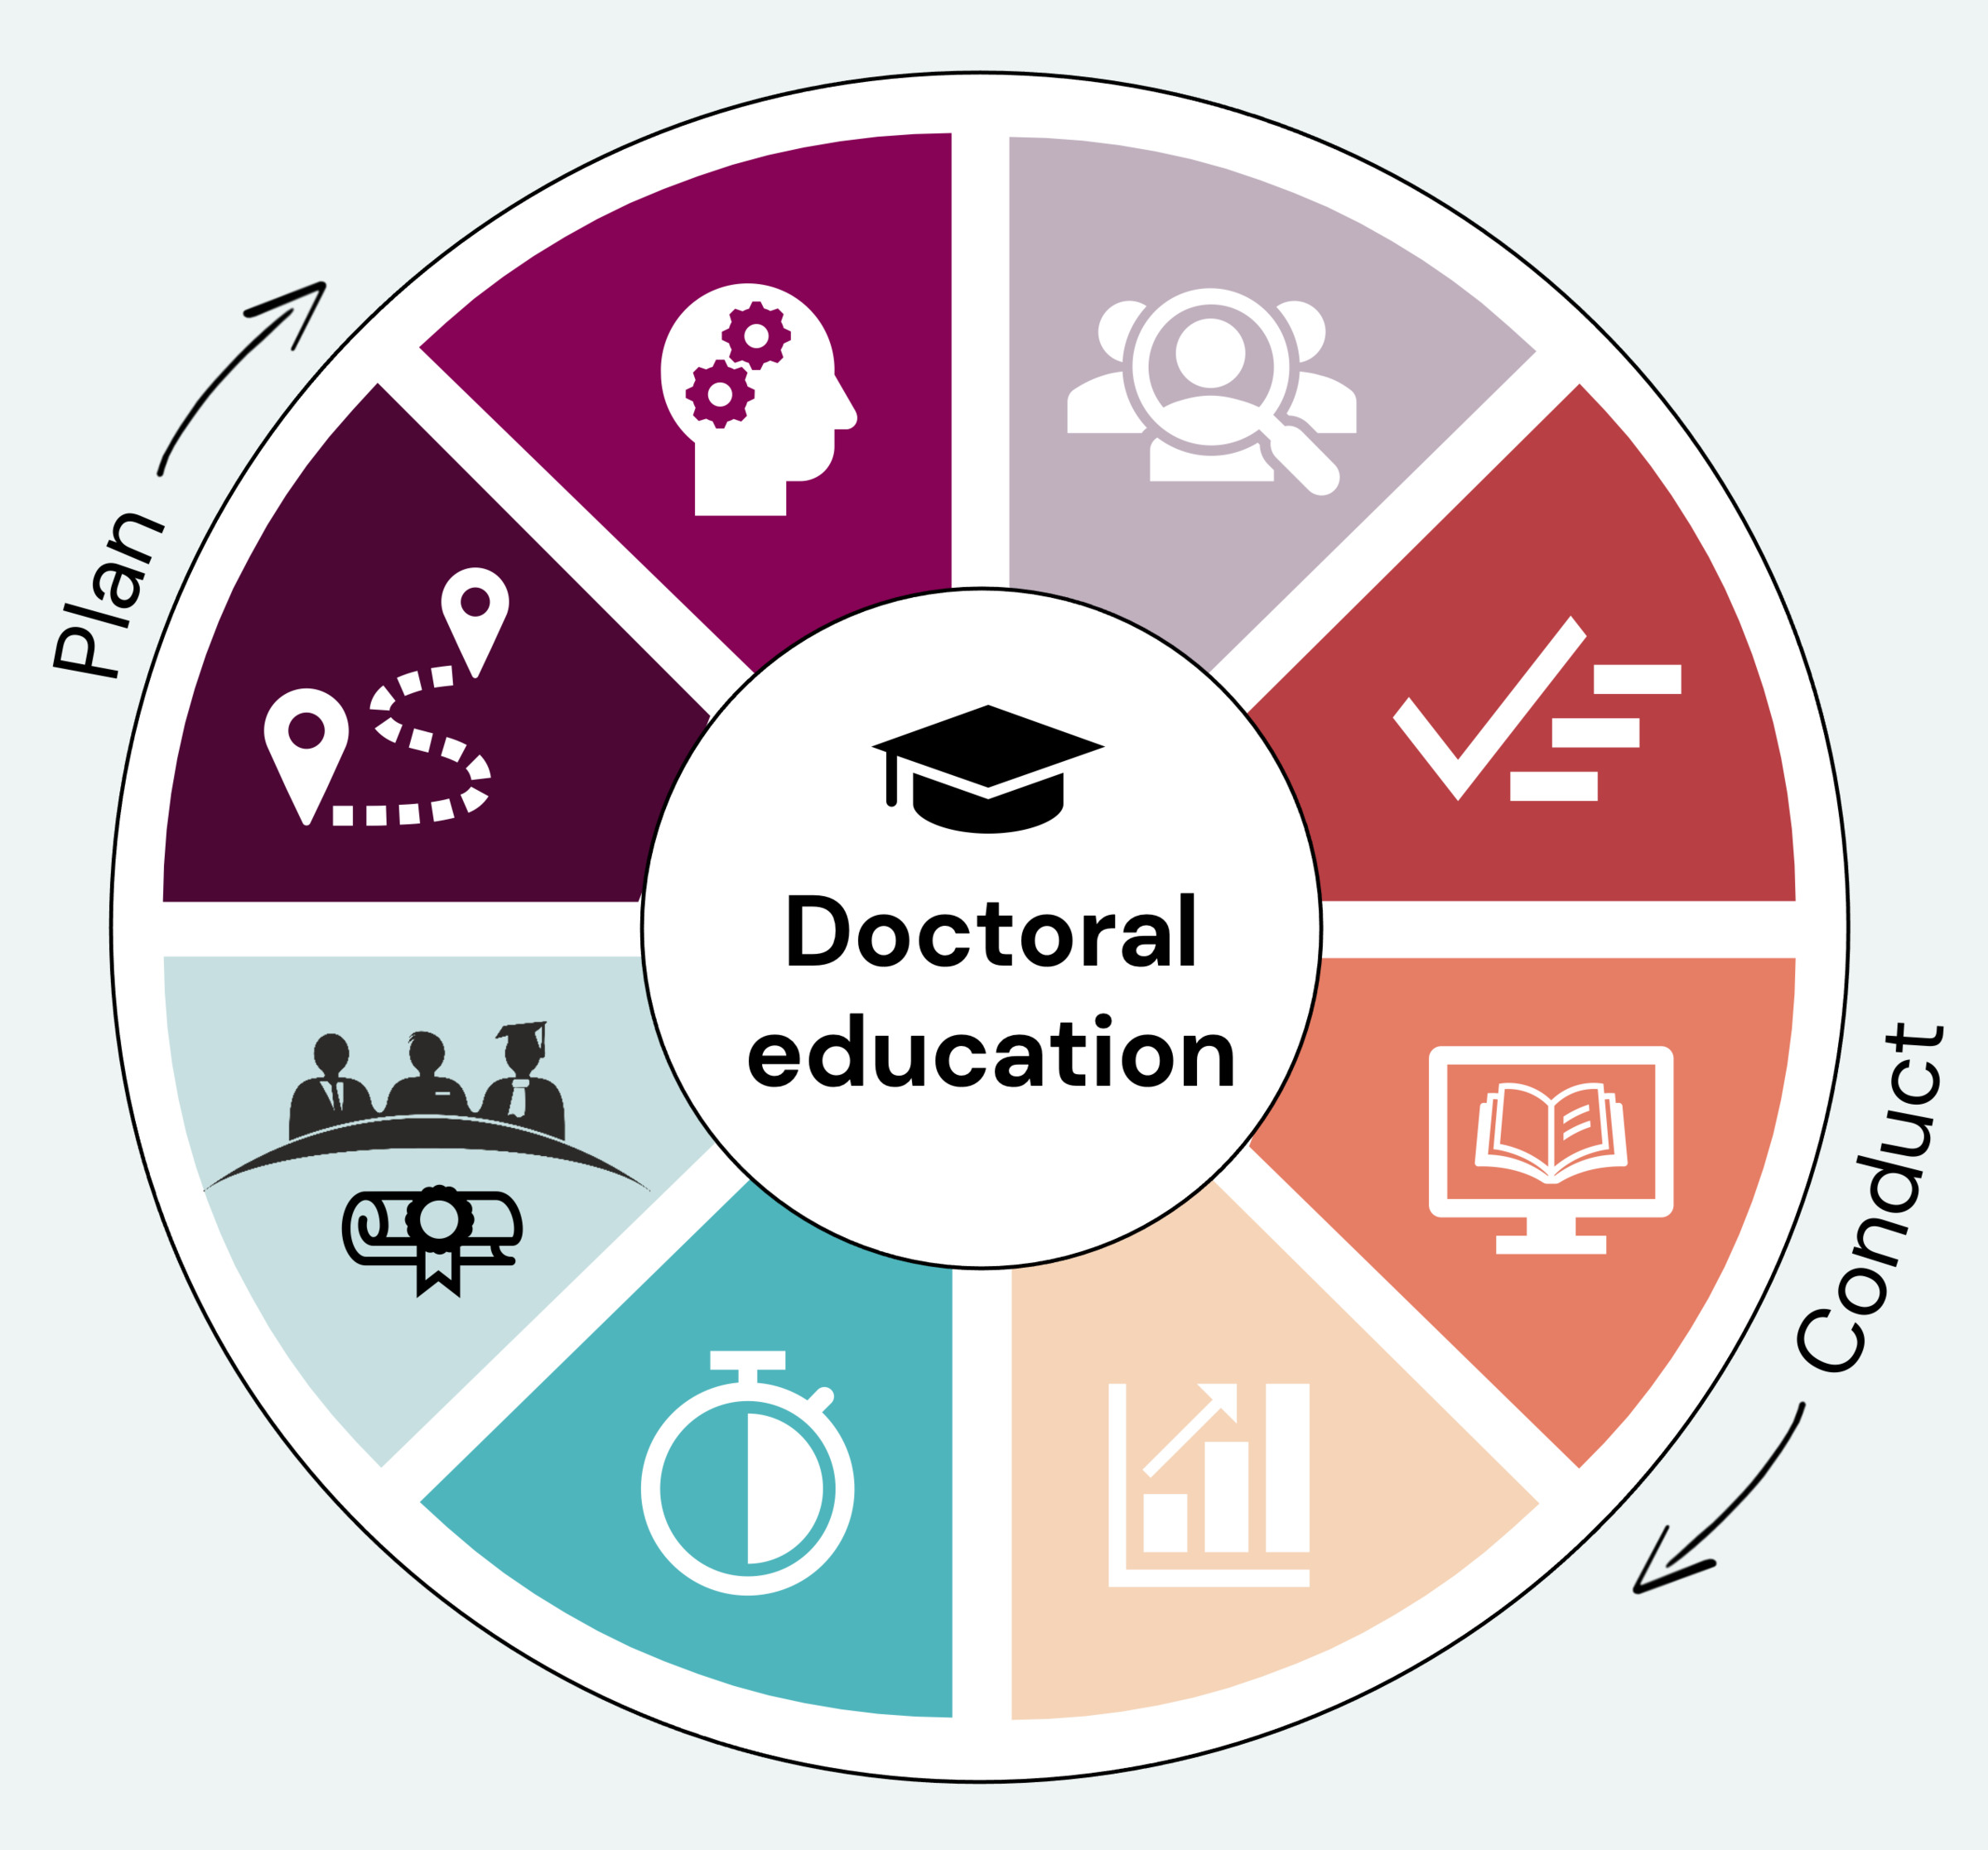 Doctoral education support